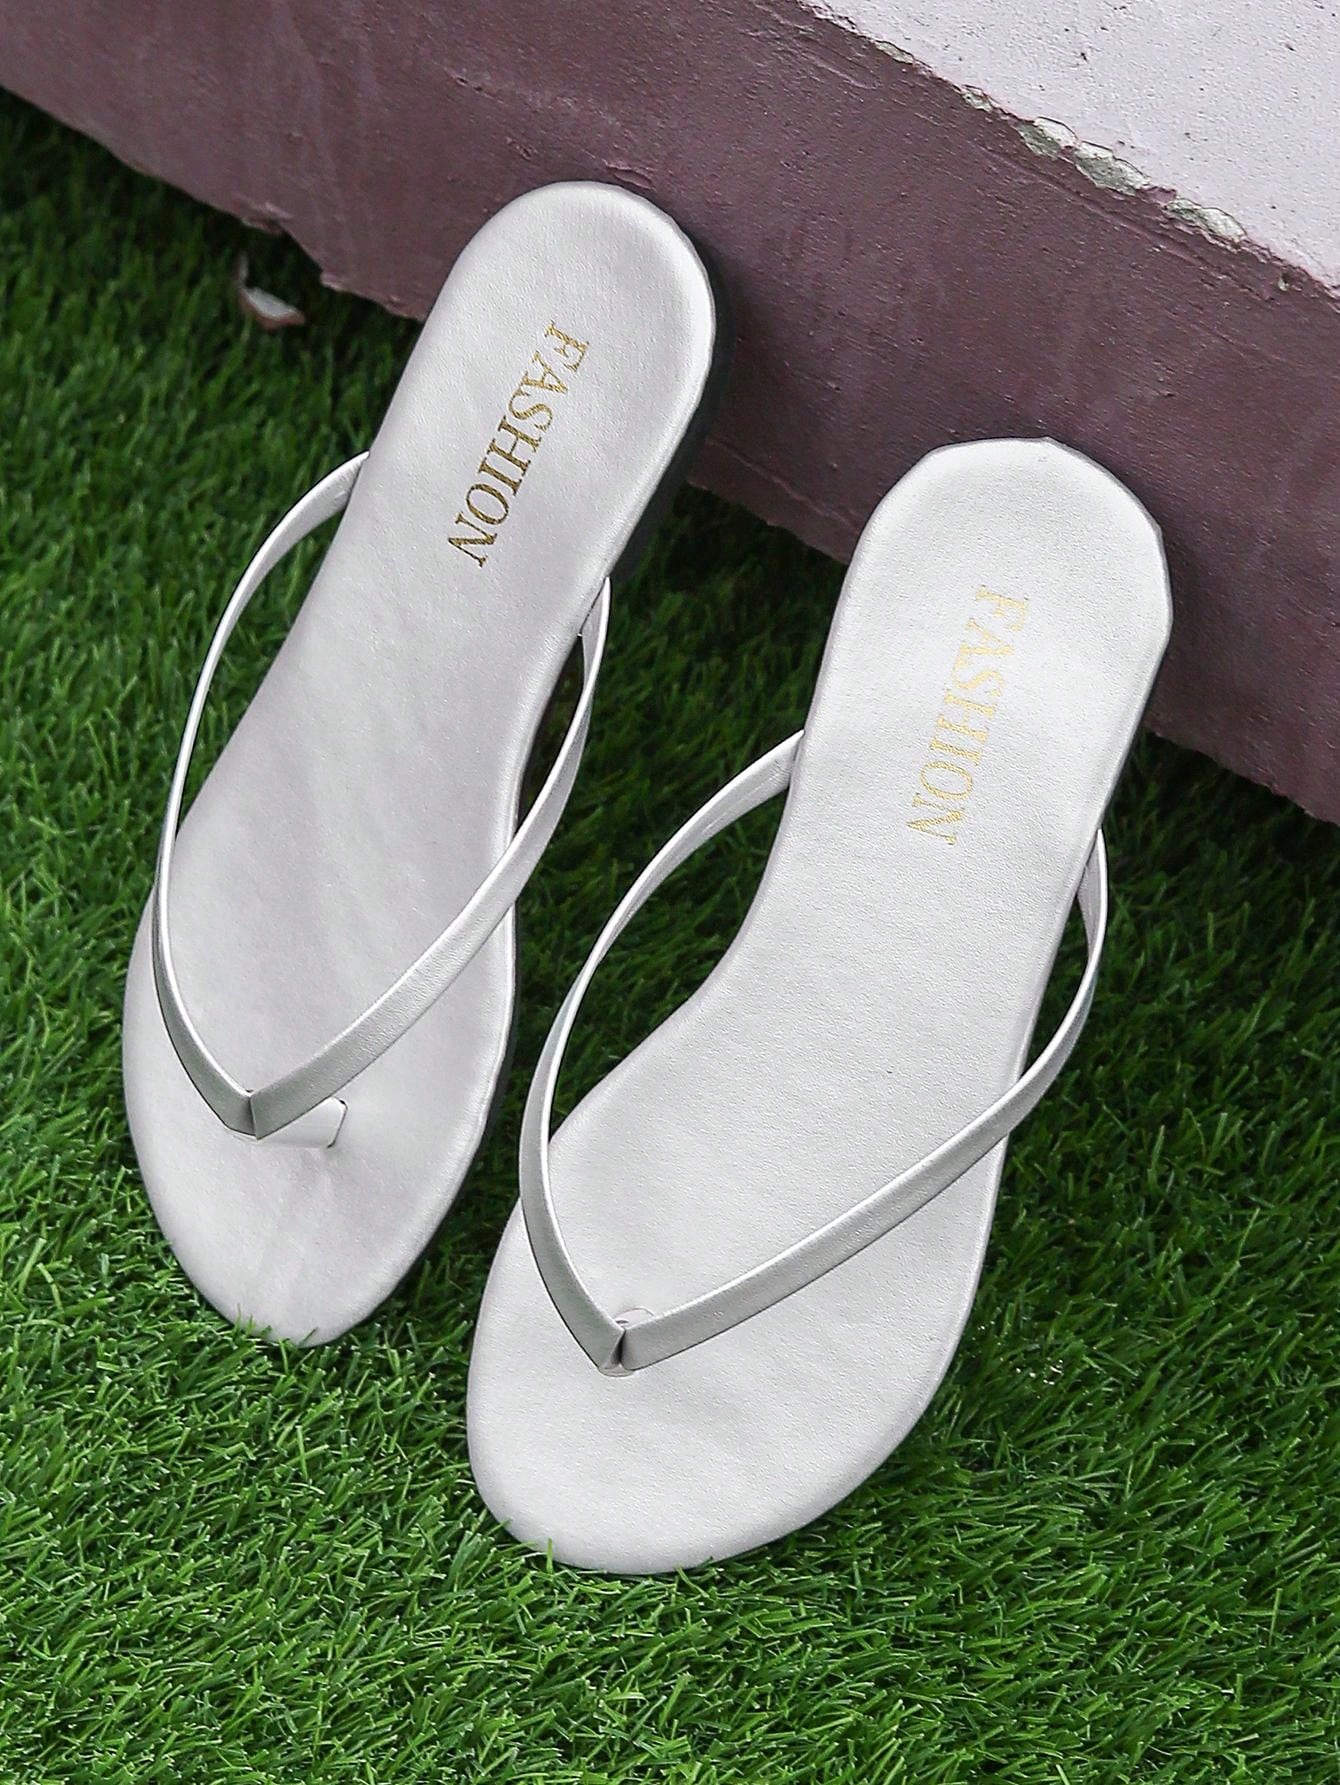 Summer New Style Slippers With Anti-Slip And Quiet Home Bathroom Indoor Clip Foot Women's Fashionable Casual Beach Flip Flops With Flat And Toe Separator-Silver-10